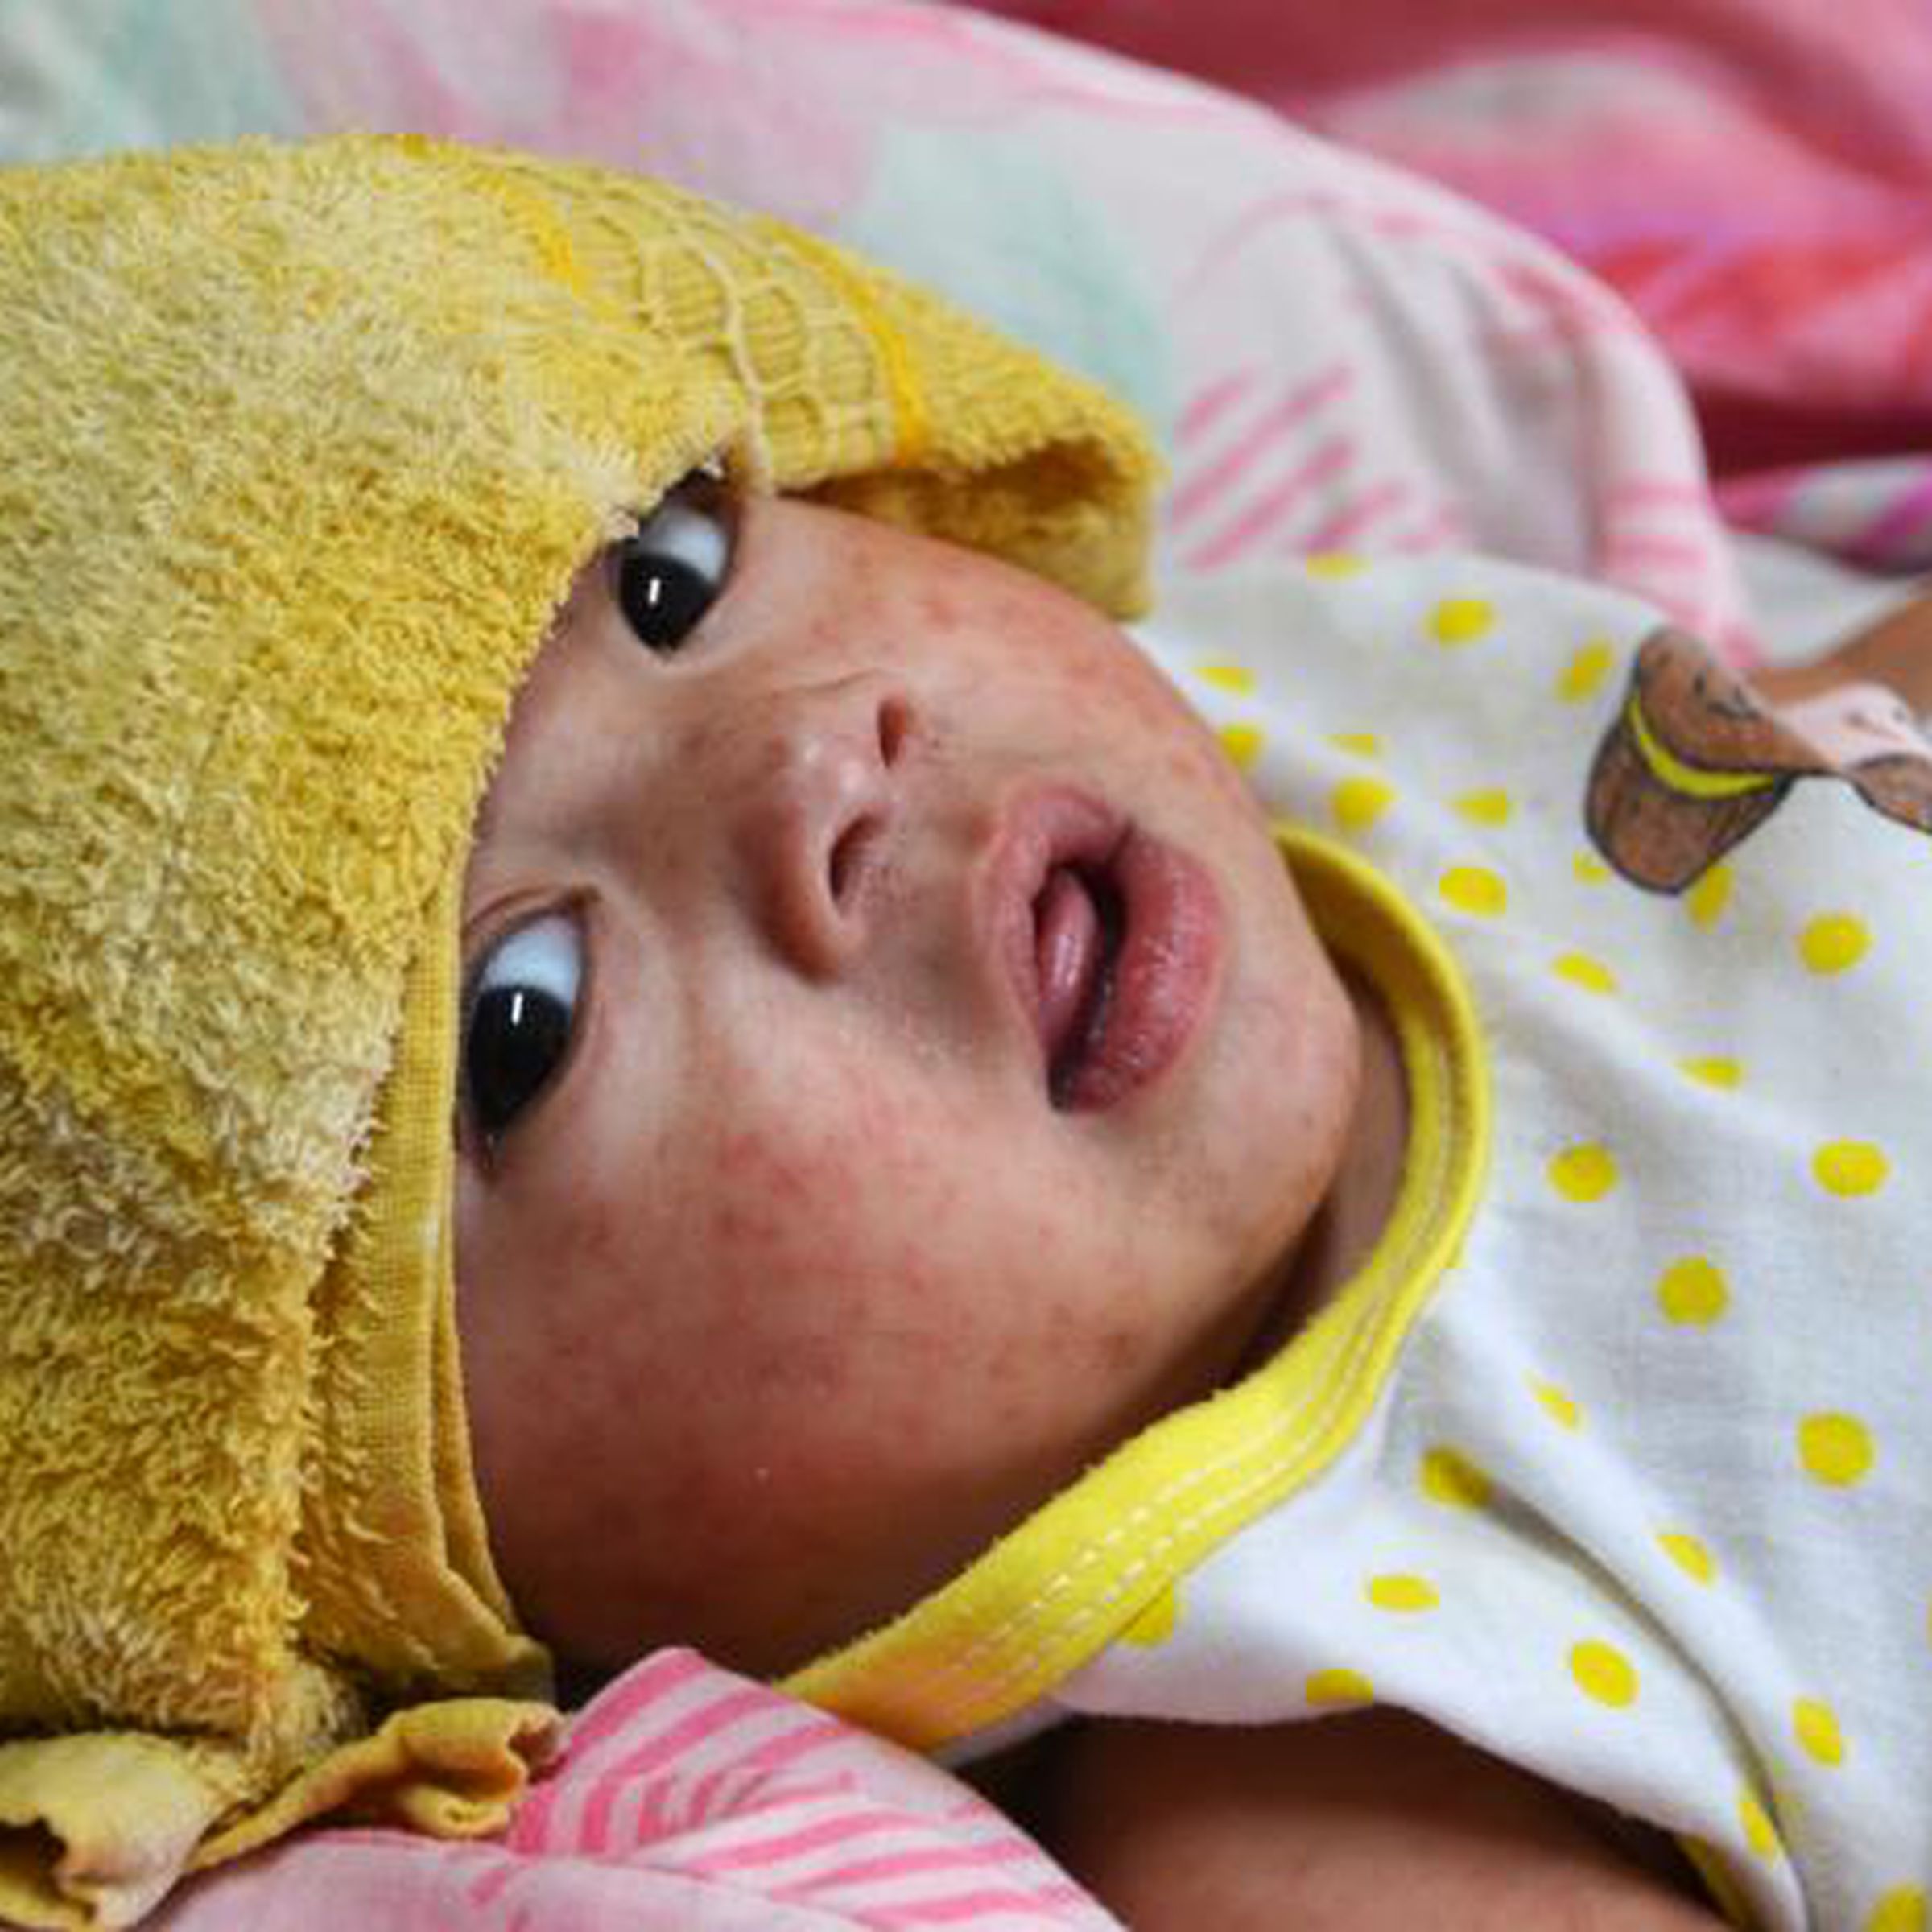 Measles is known for causing rashes — like the one affecting this child in the Philippines in 2014.